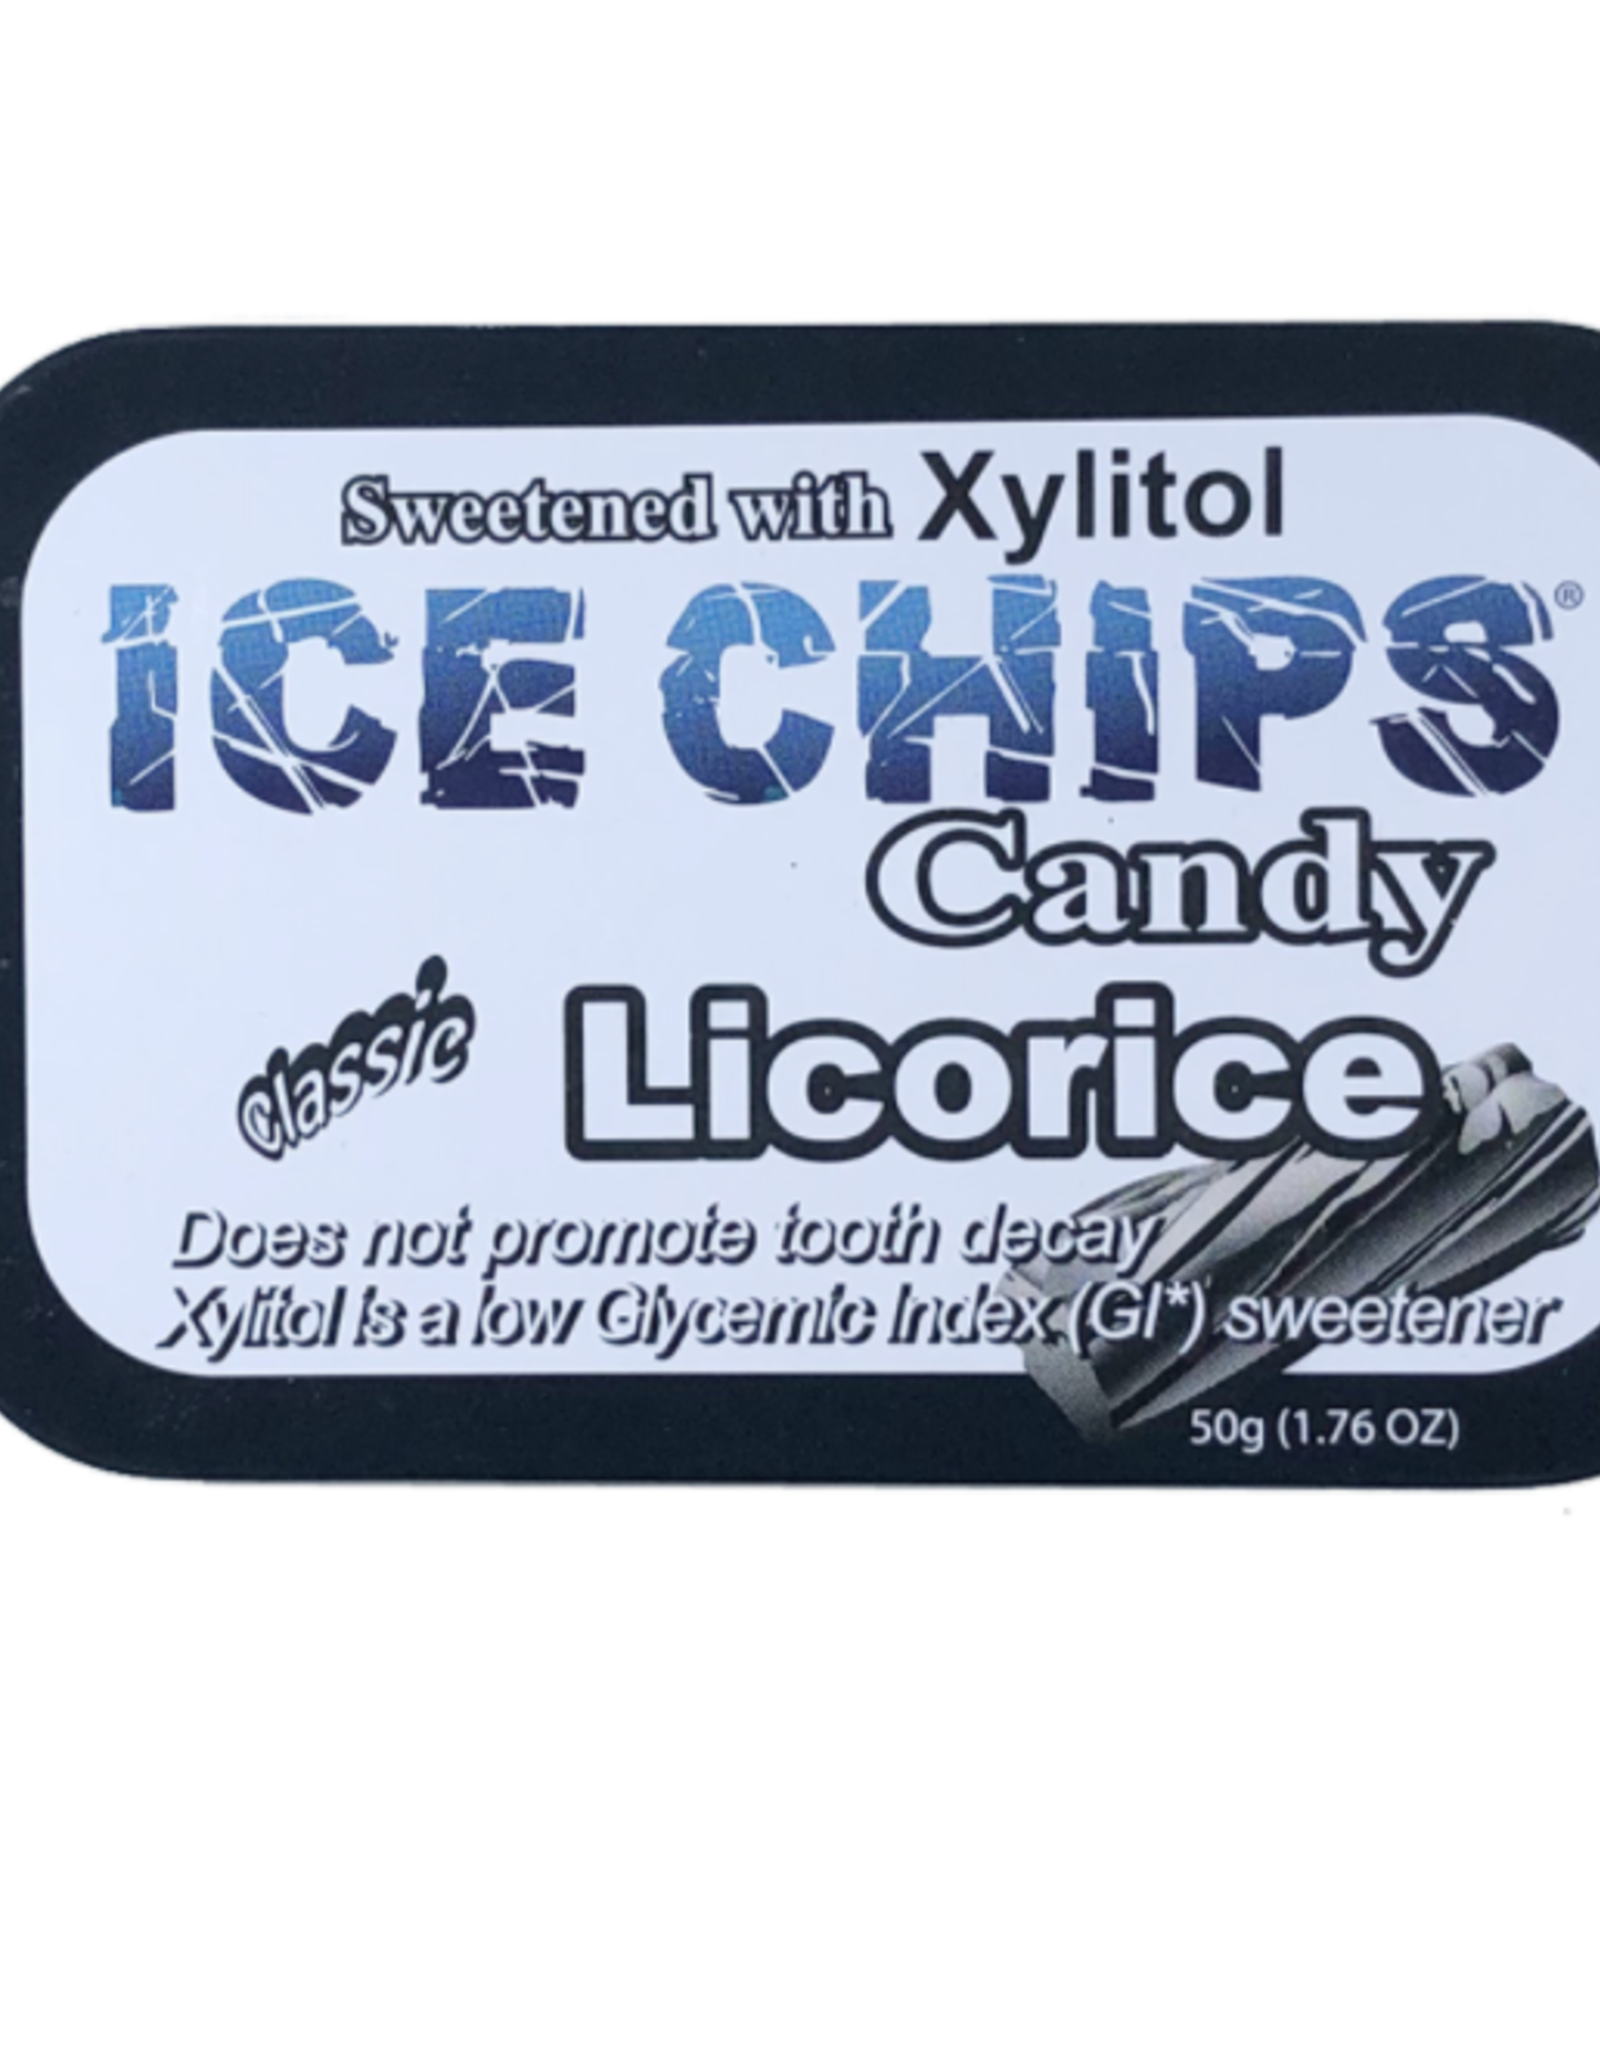 Ice Chips Ice Chips Licorice